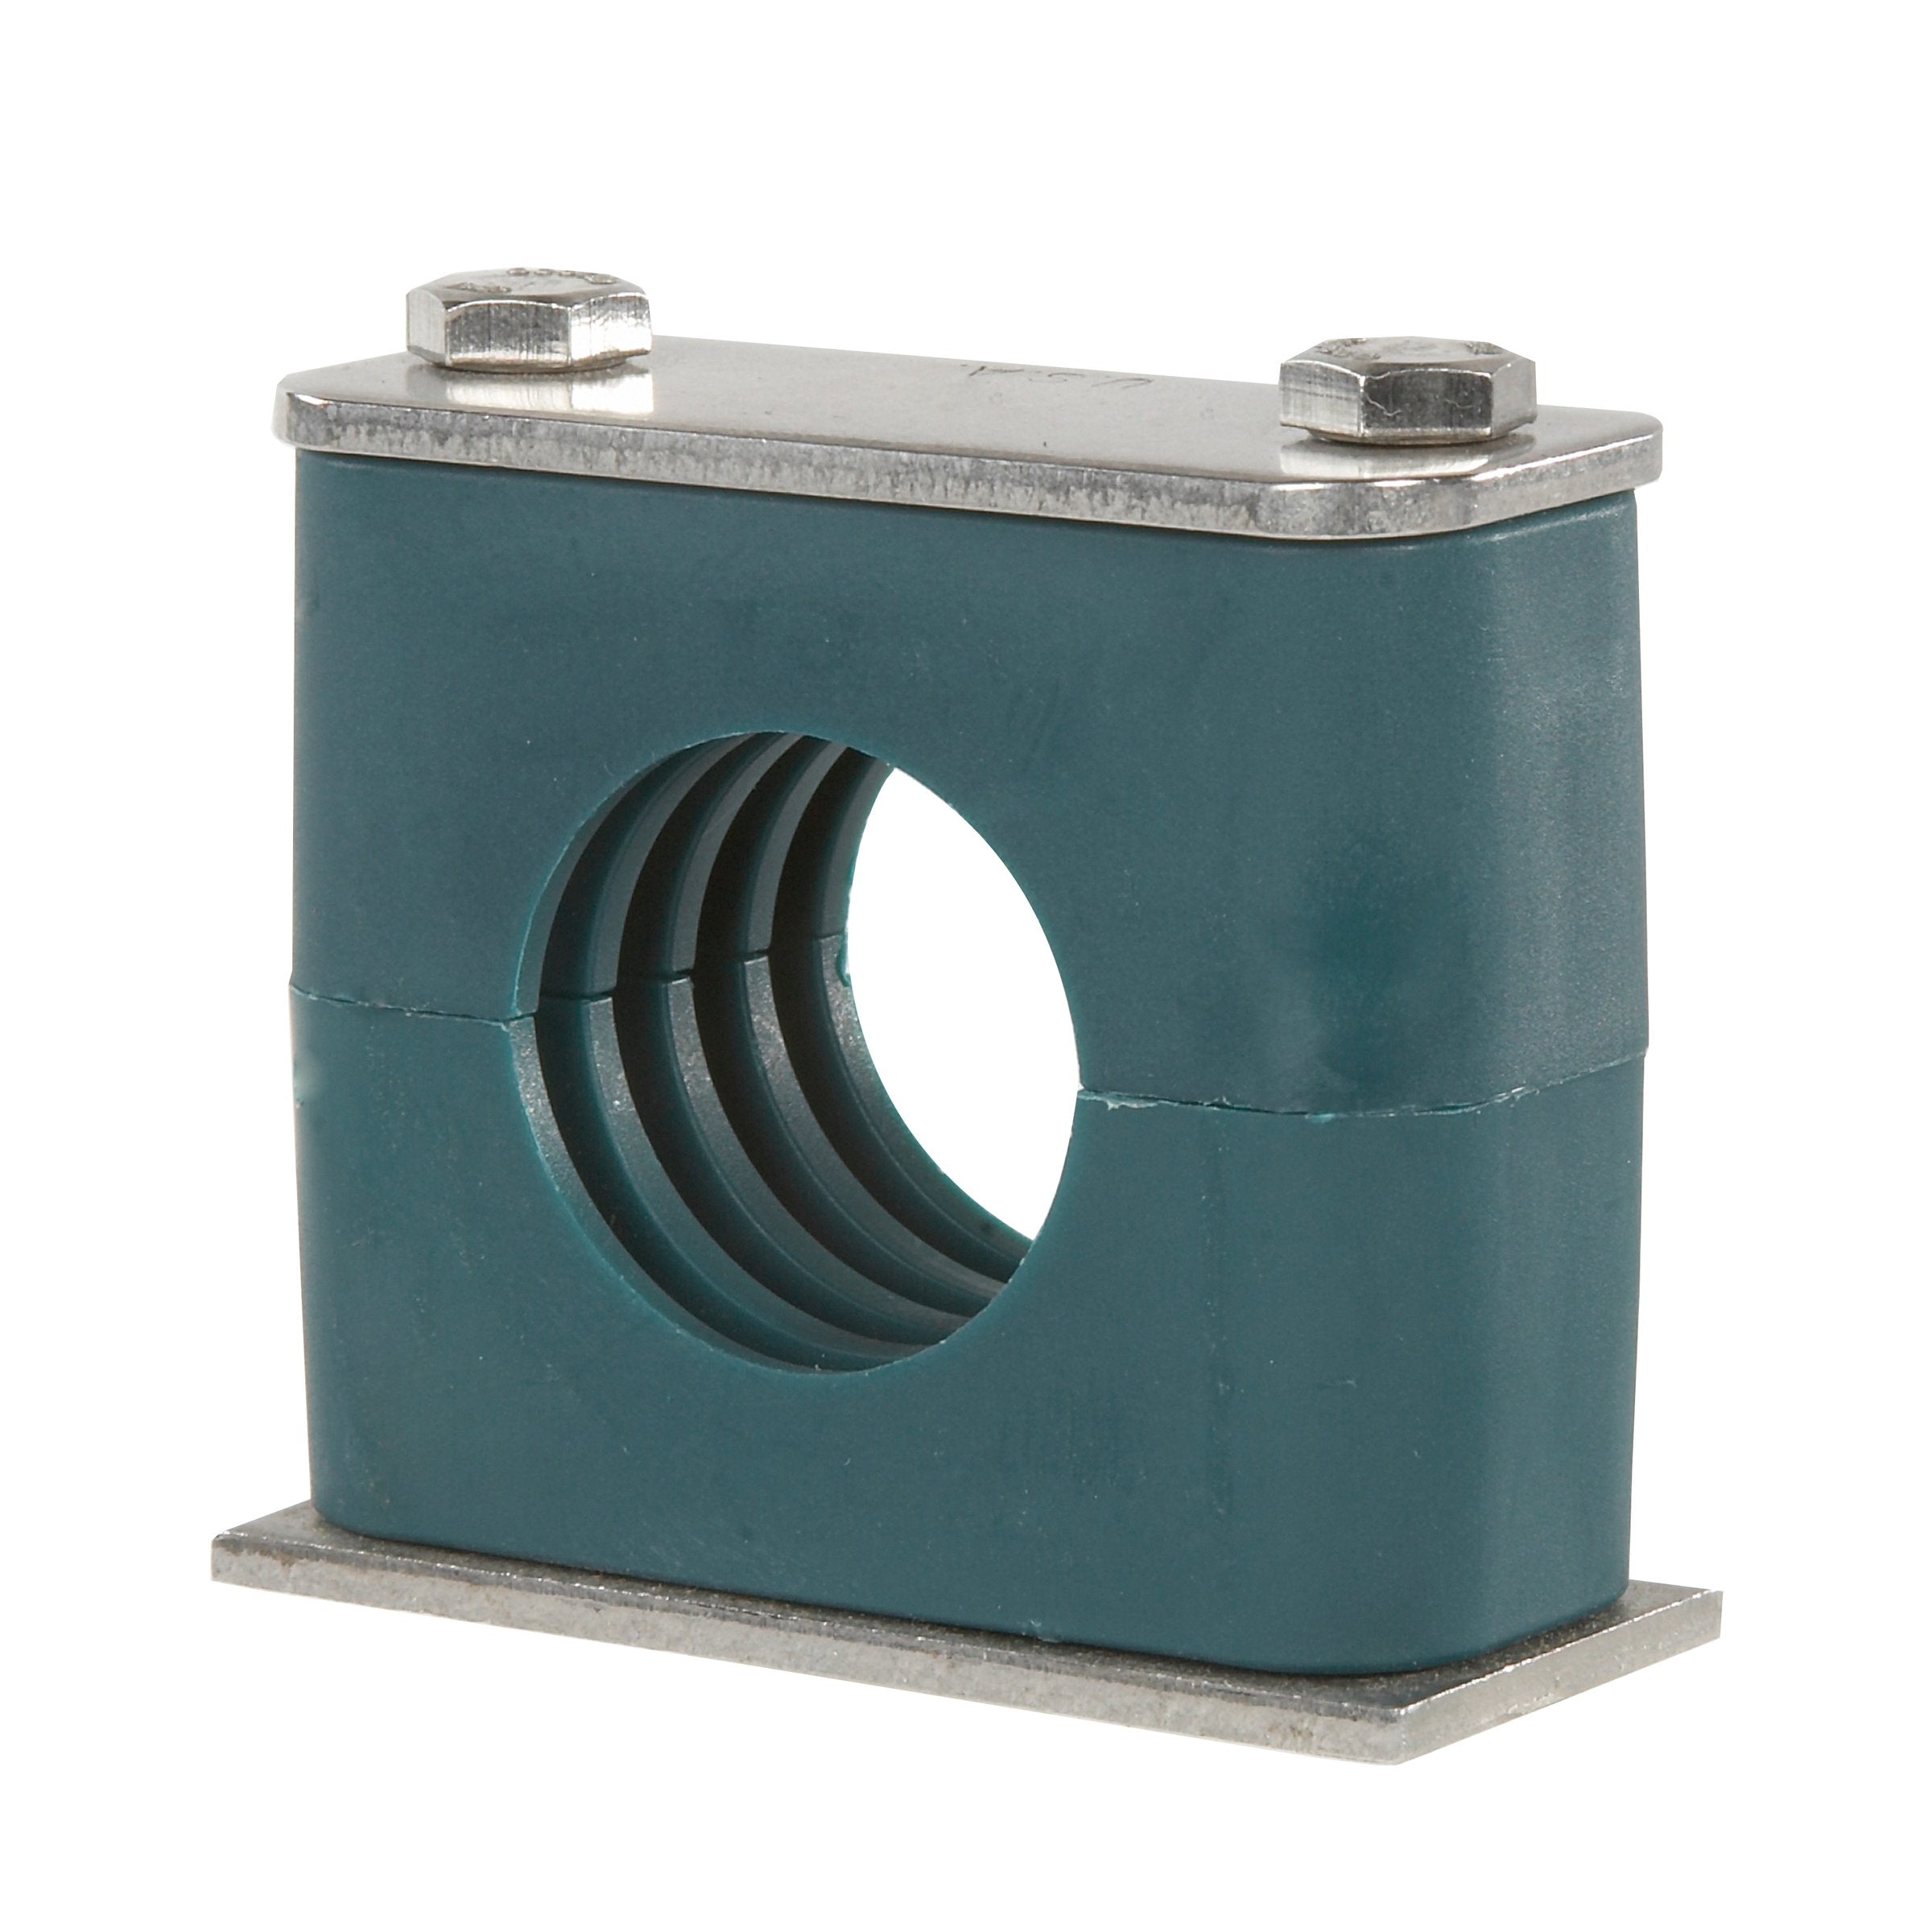 SP-321.3-PP-DP-AS-U-W5 : Stauff Clamp, Single Weld Plate, 0.84" (21.3mm) OD, for 1/2" Pipe, Green PP Insert, Profiled Interior, 316SS